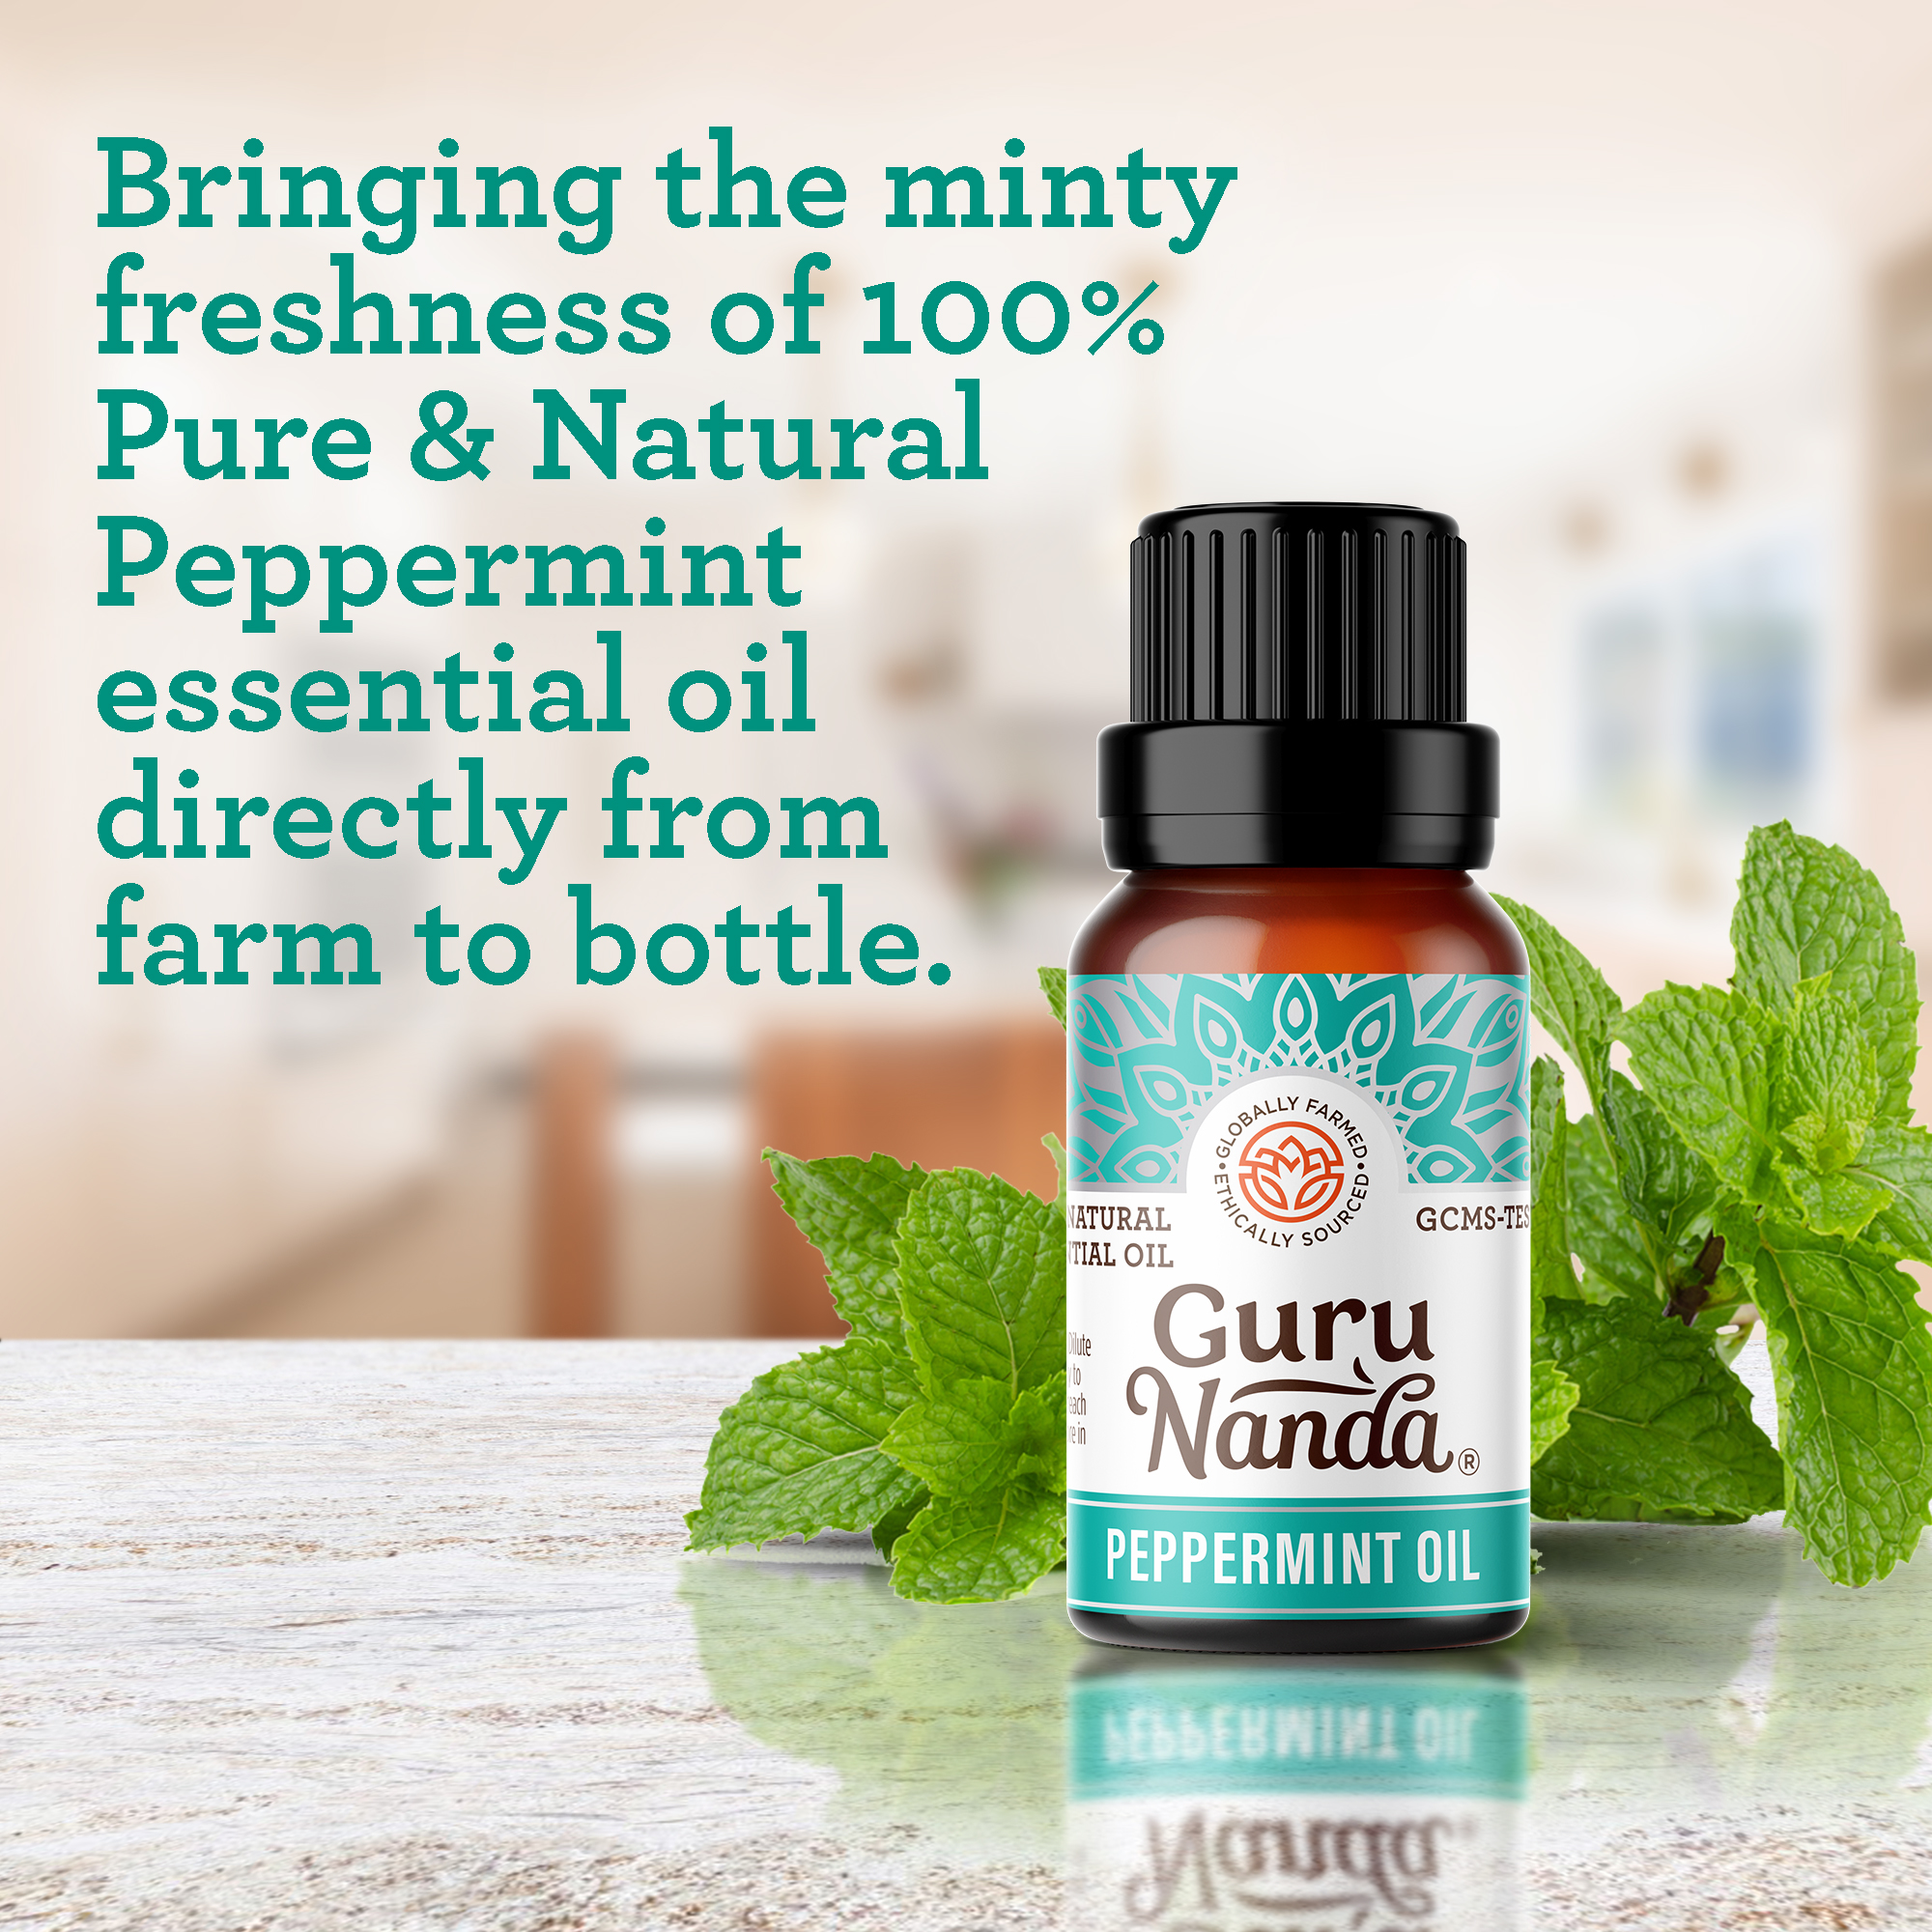 GuruNanda 100% Pure and Natural Peppermint Oil for Aromatherapy, & Diffuser - 15ml - image 4 of 9